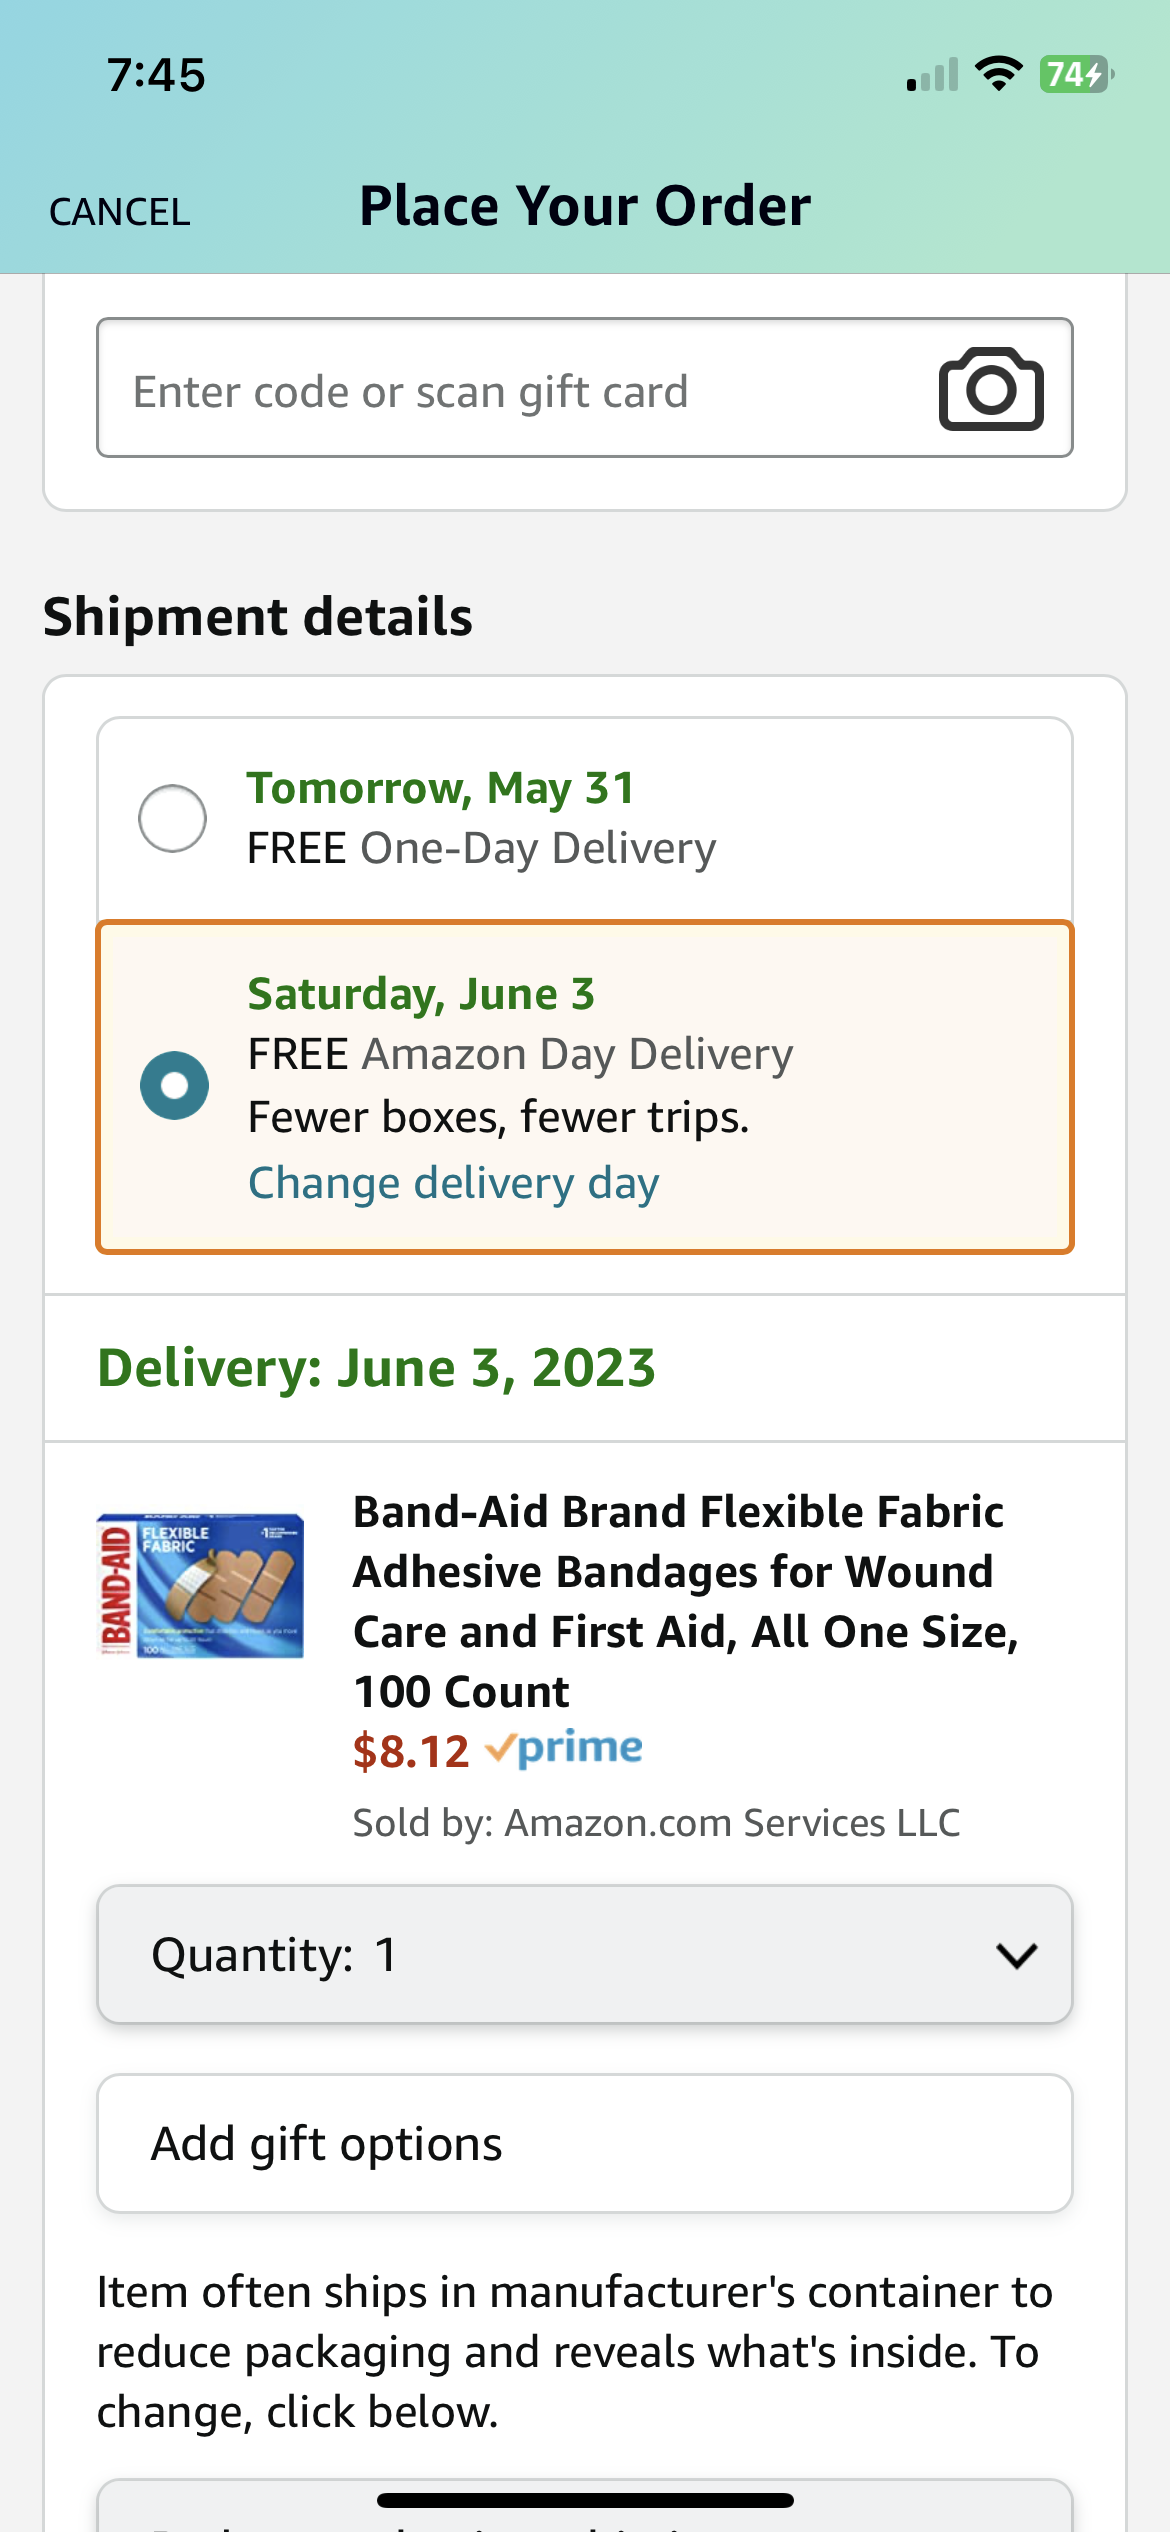 https://truthinadvertising.org/wp-content/uploads/2023/06/Amazon-bandaids-place-your-order.png